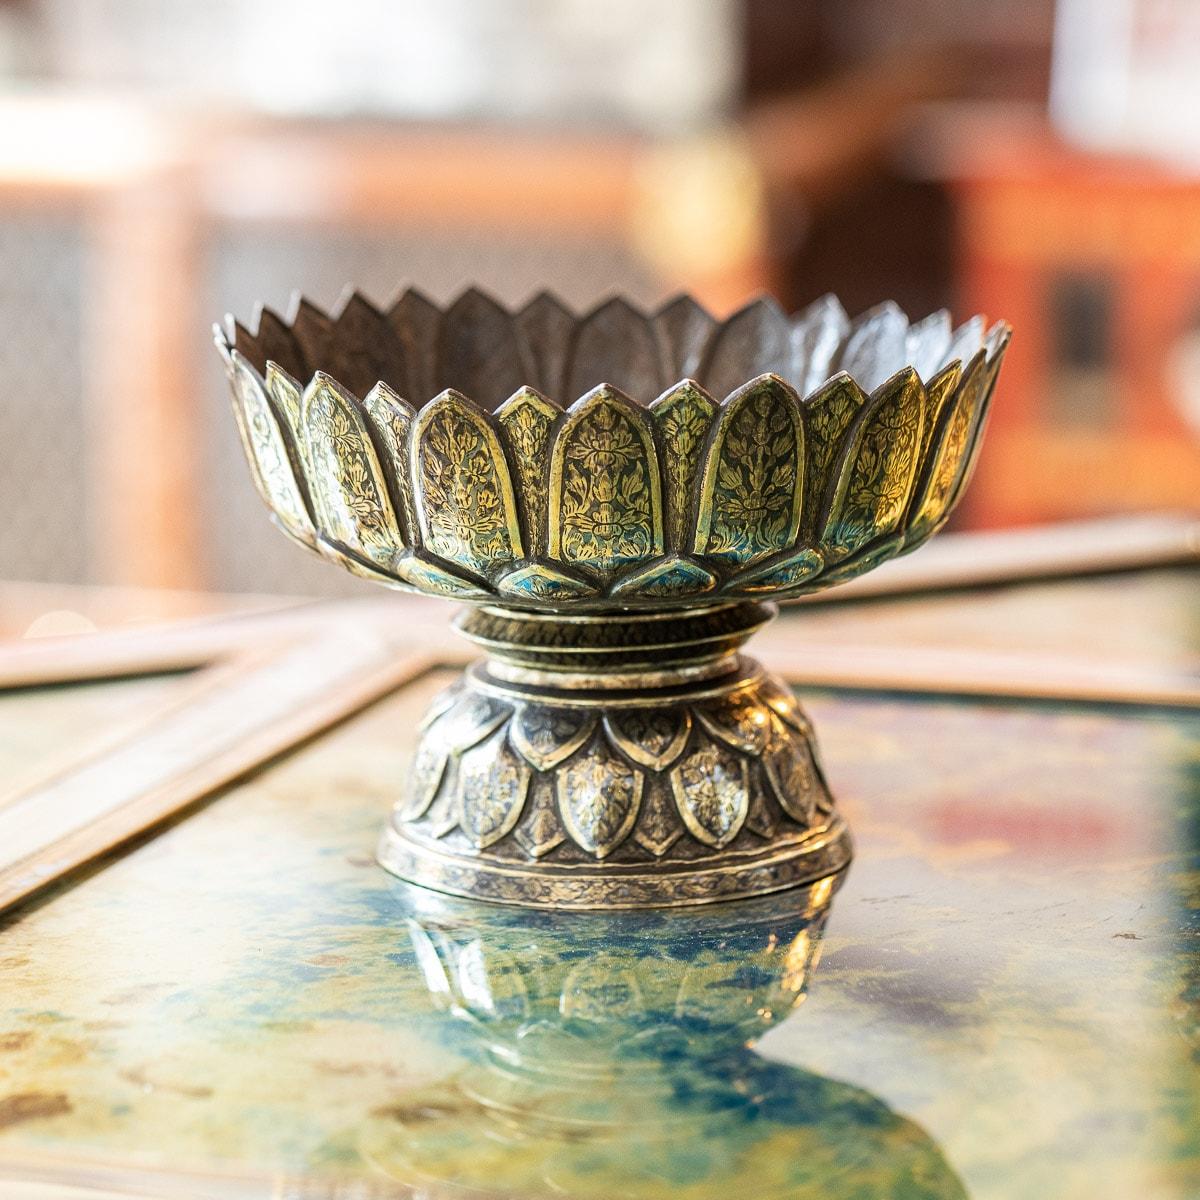 Antique early-19th Century extremely rare & fine solid silver niello bowl, stylised leaf shaped rim and domed spreading foot, repousse decorated with dense floral gilded ground. Nielloware art and jewellery has always been very popular in Thailand,